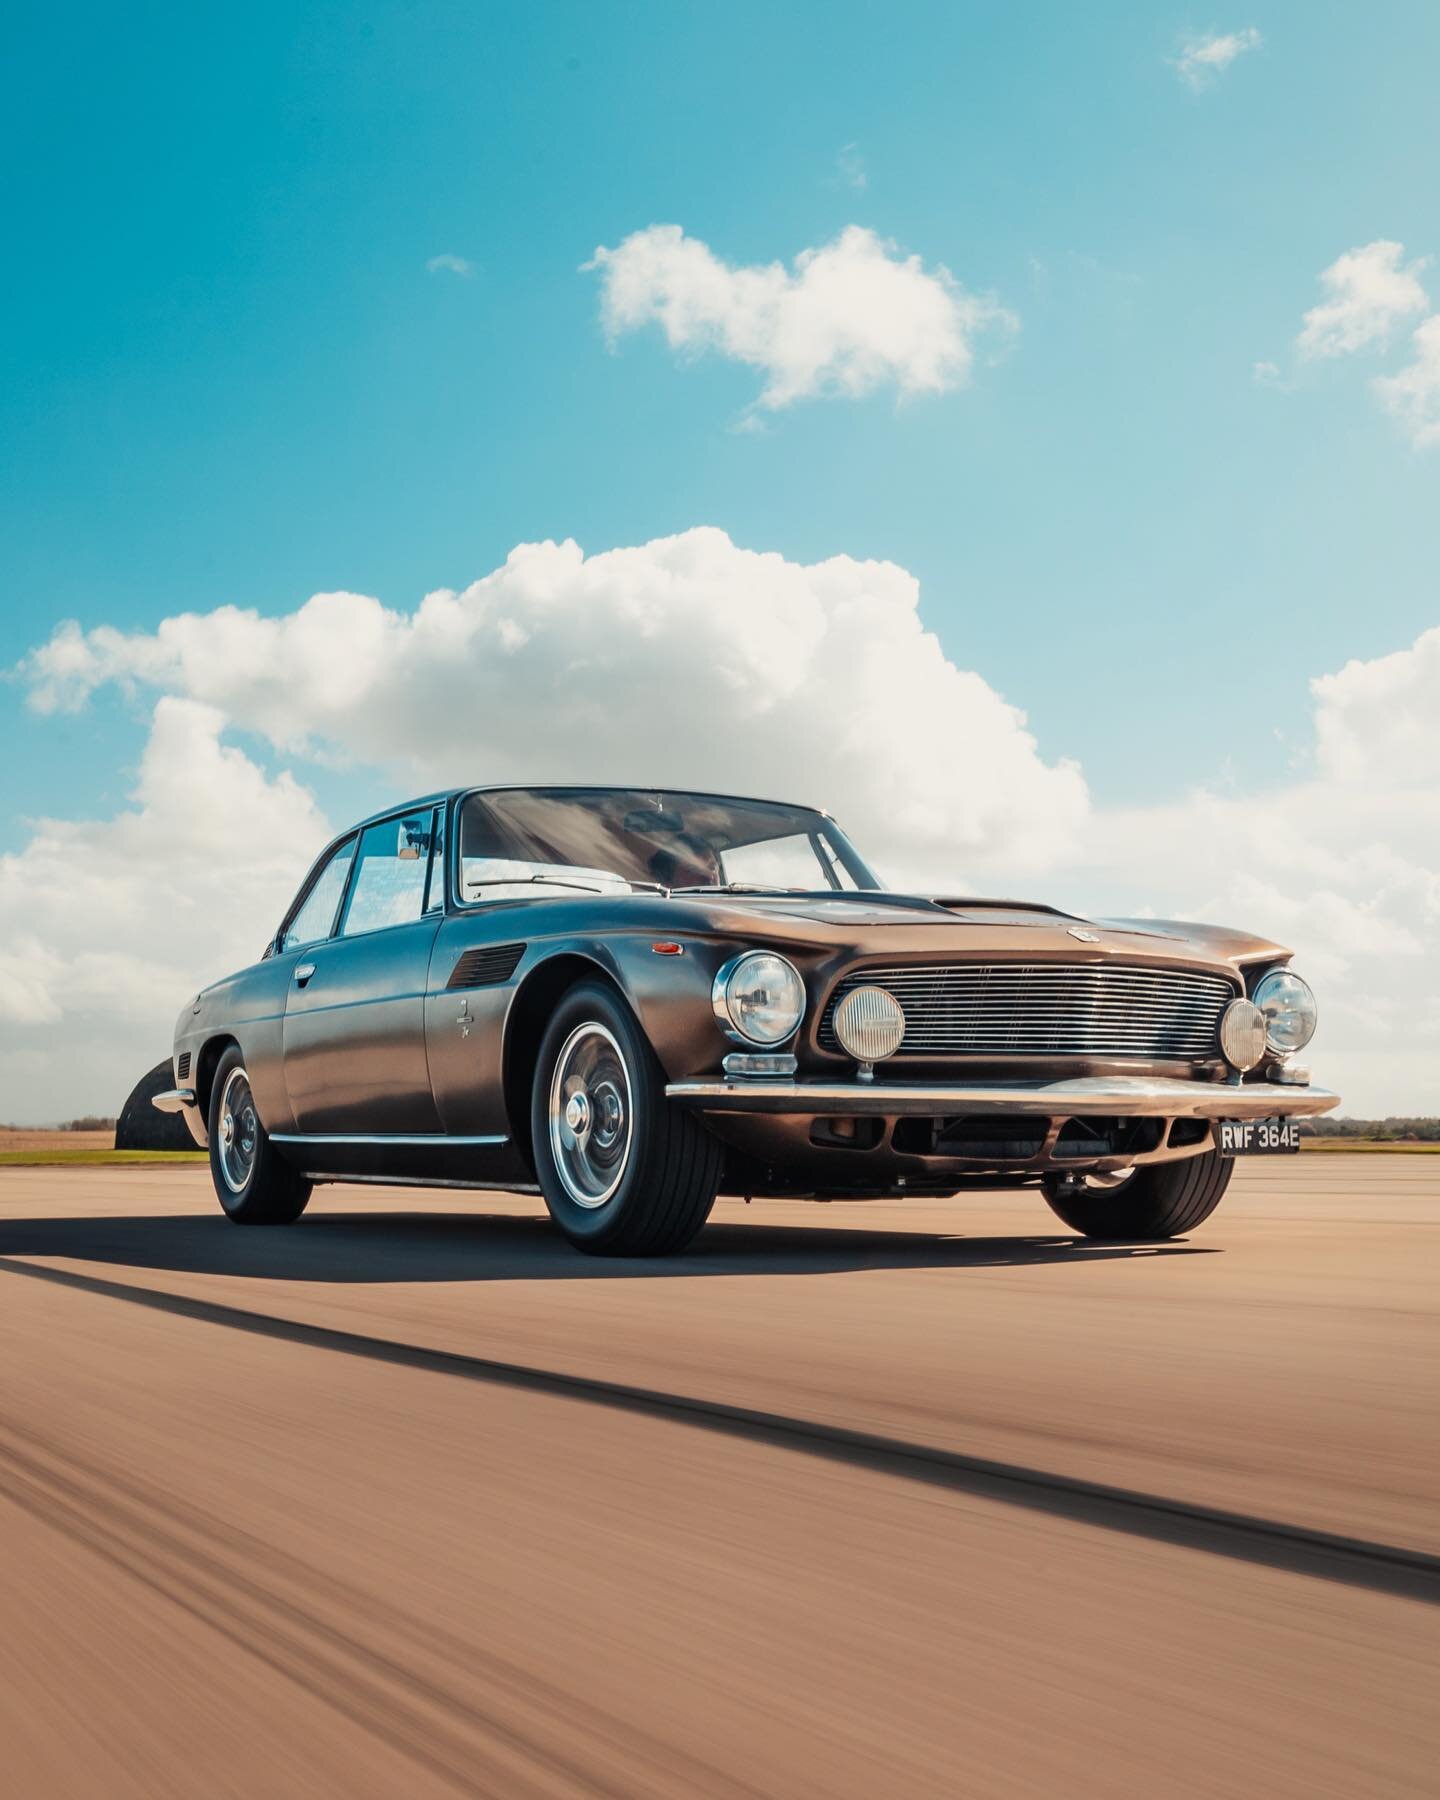 ISO Rivolta photographed for this months Issue of @officialoctanemagazine and yes next to a nuclear bunker too. 

Always good to see work in print and very much enjoyed this one. Thanks to @octanemagazine_design 

#carphotography #octane #octanemagaz